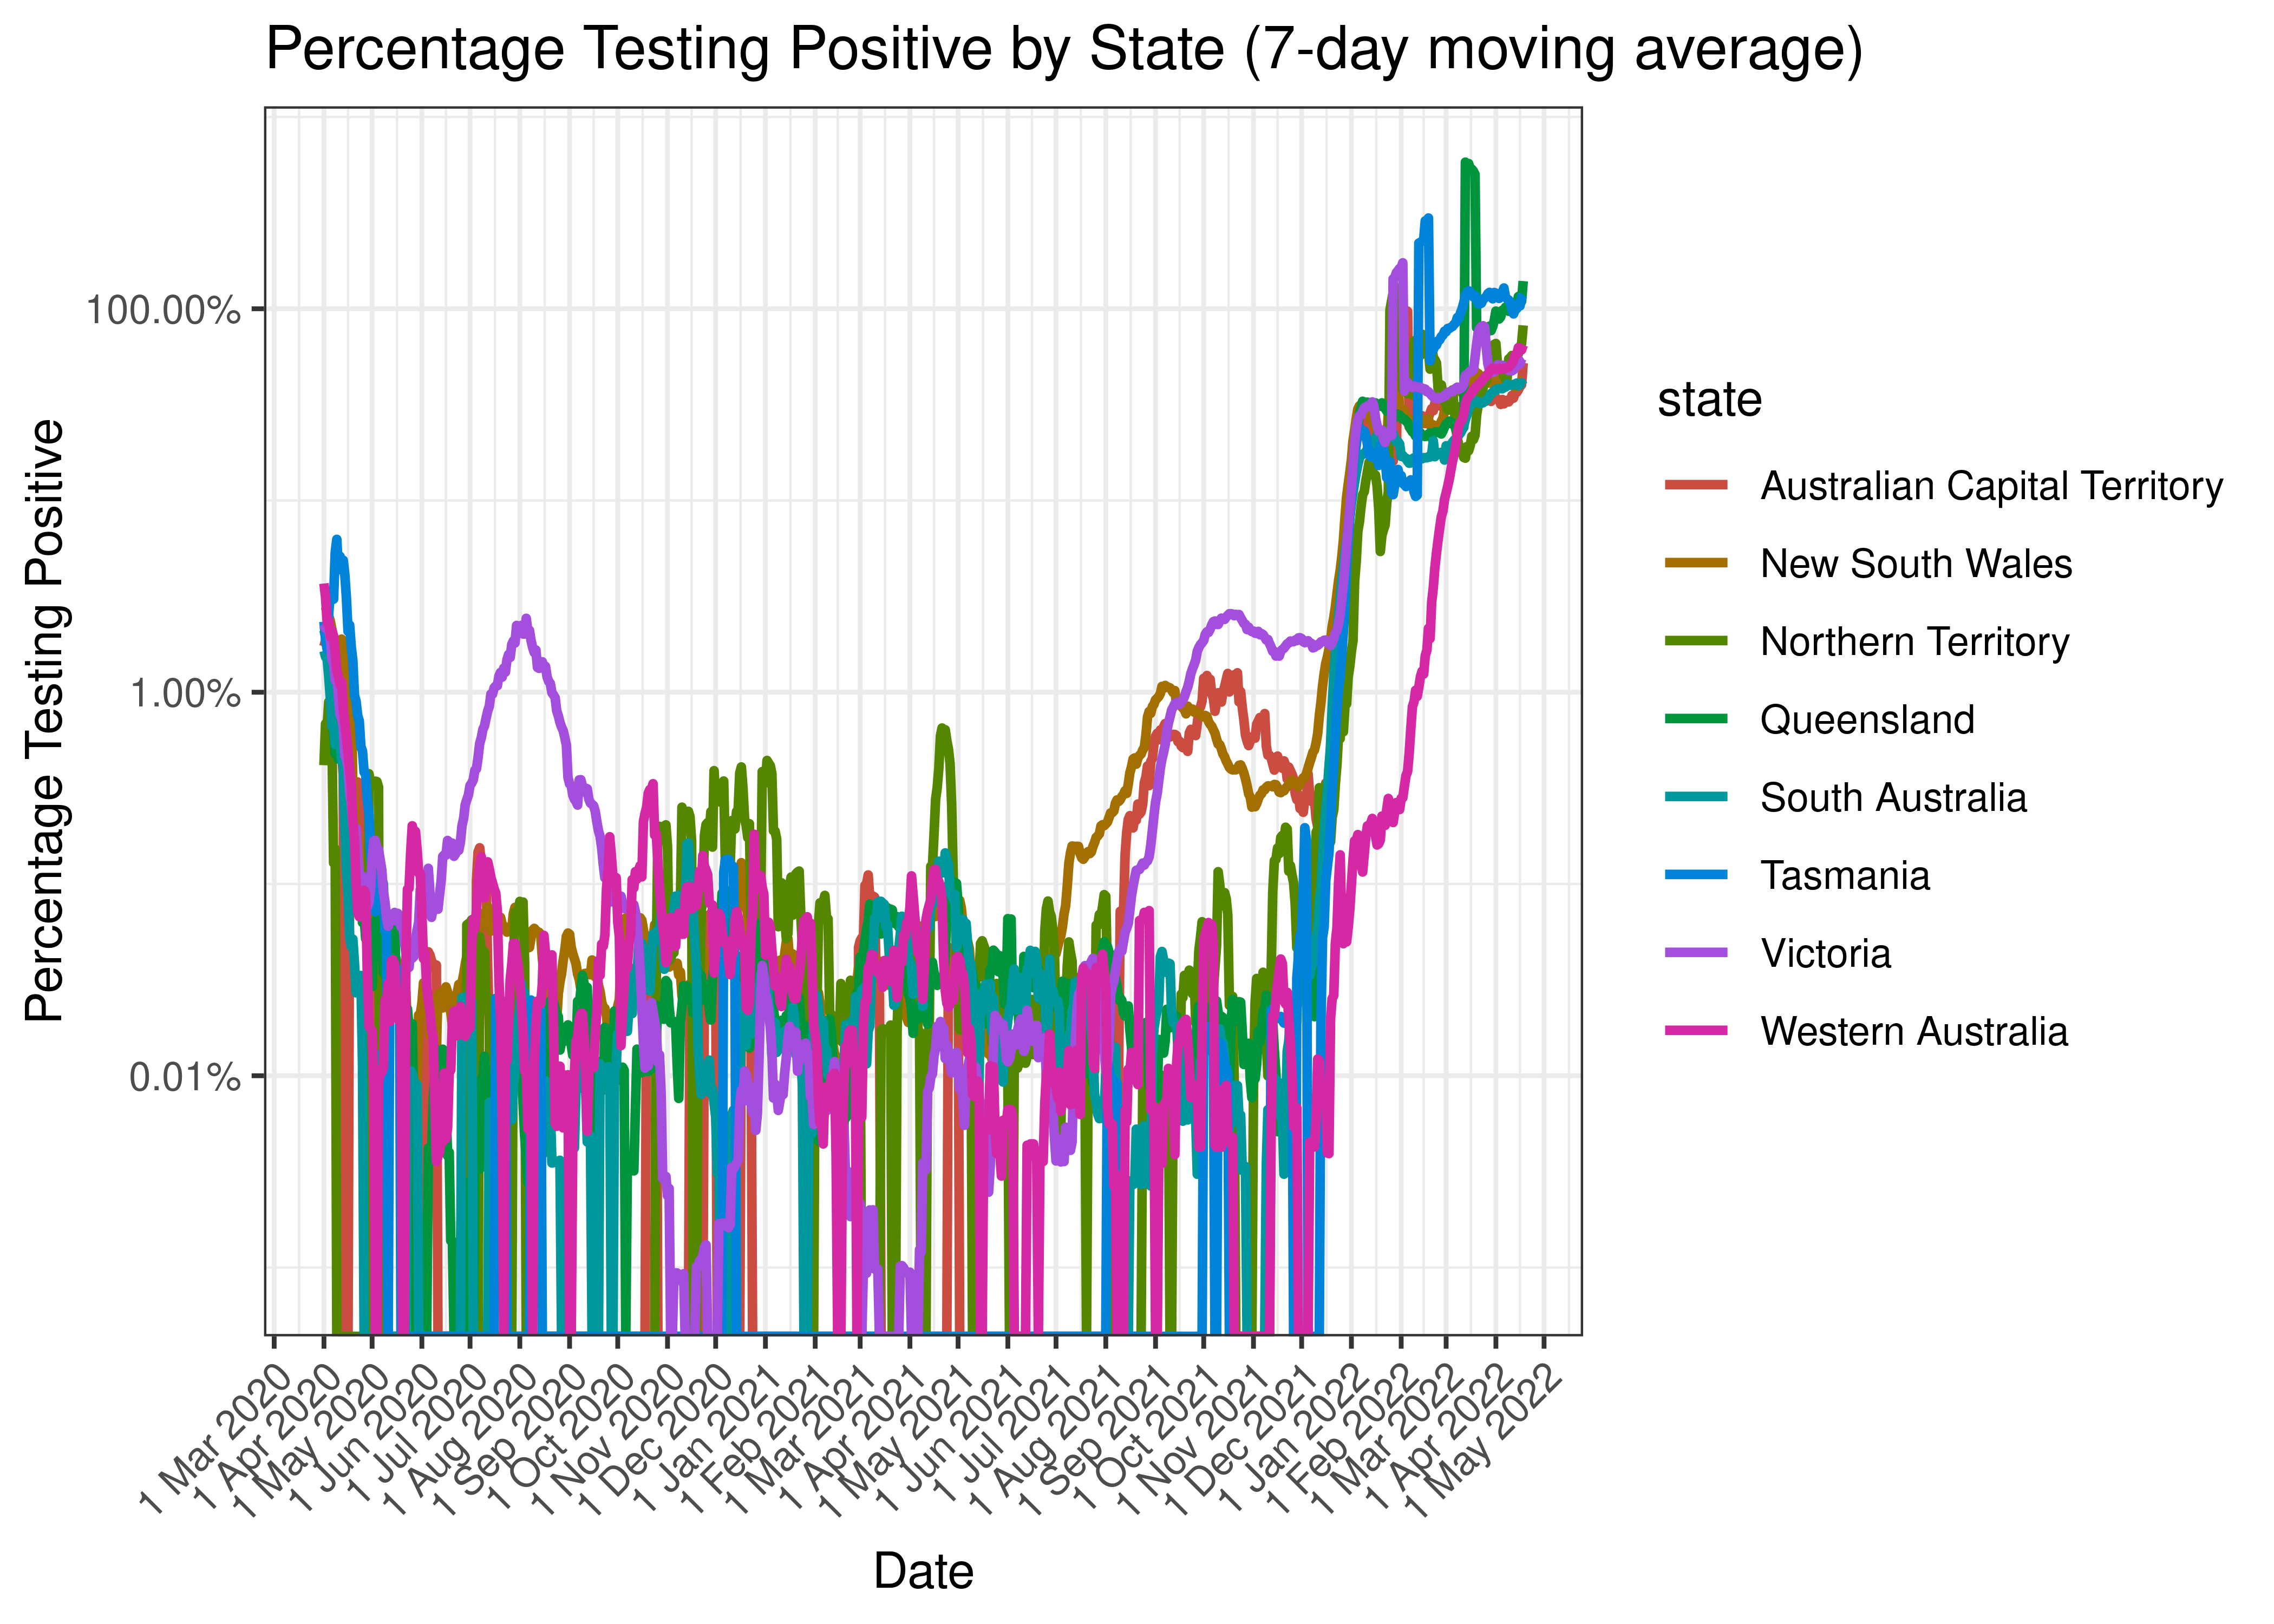 Percentage Testing Positives by State (7-day moving average)